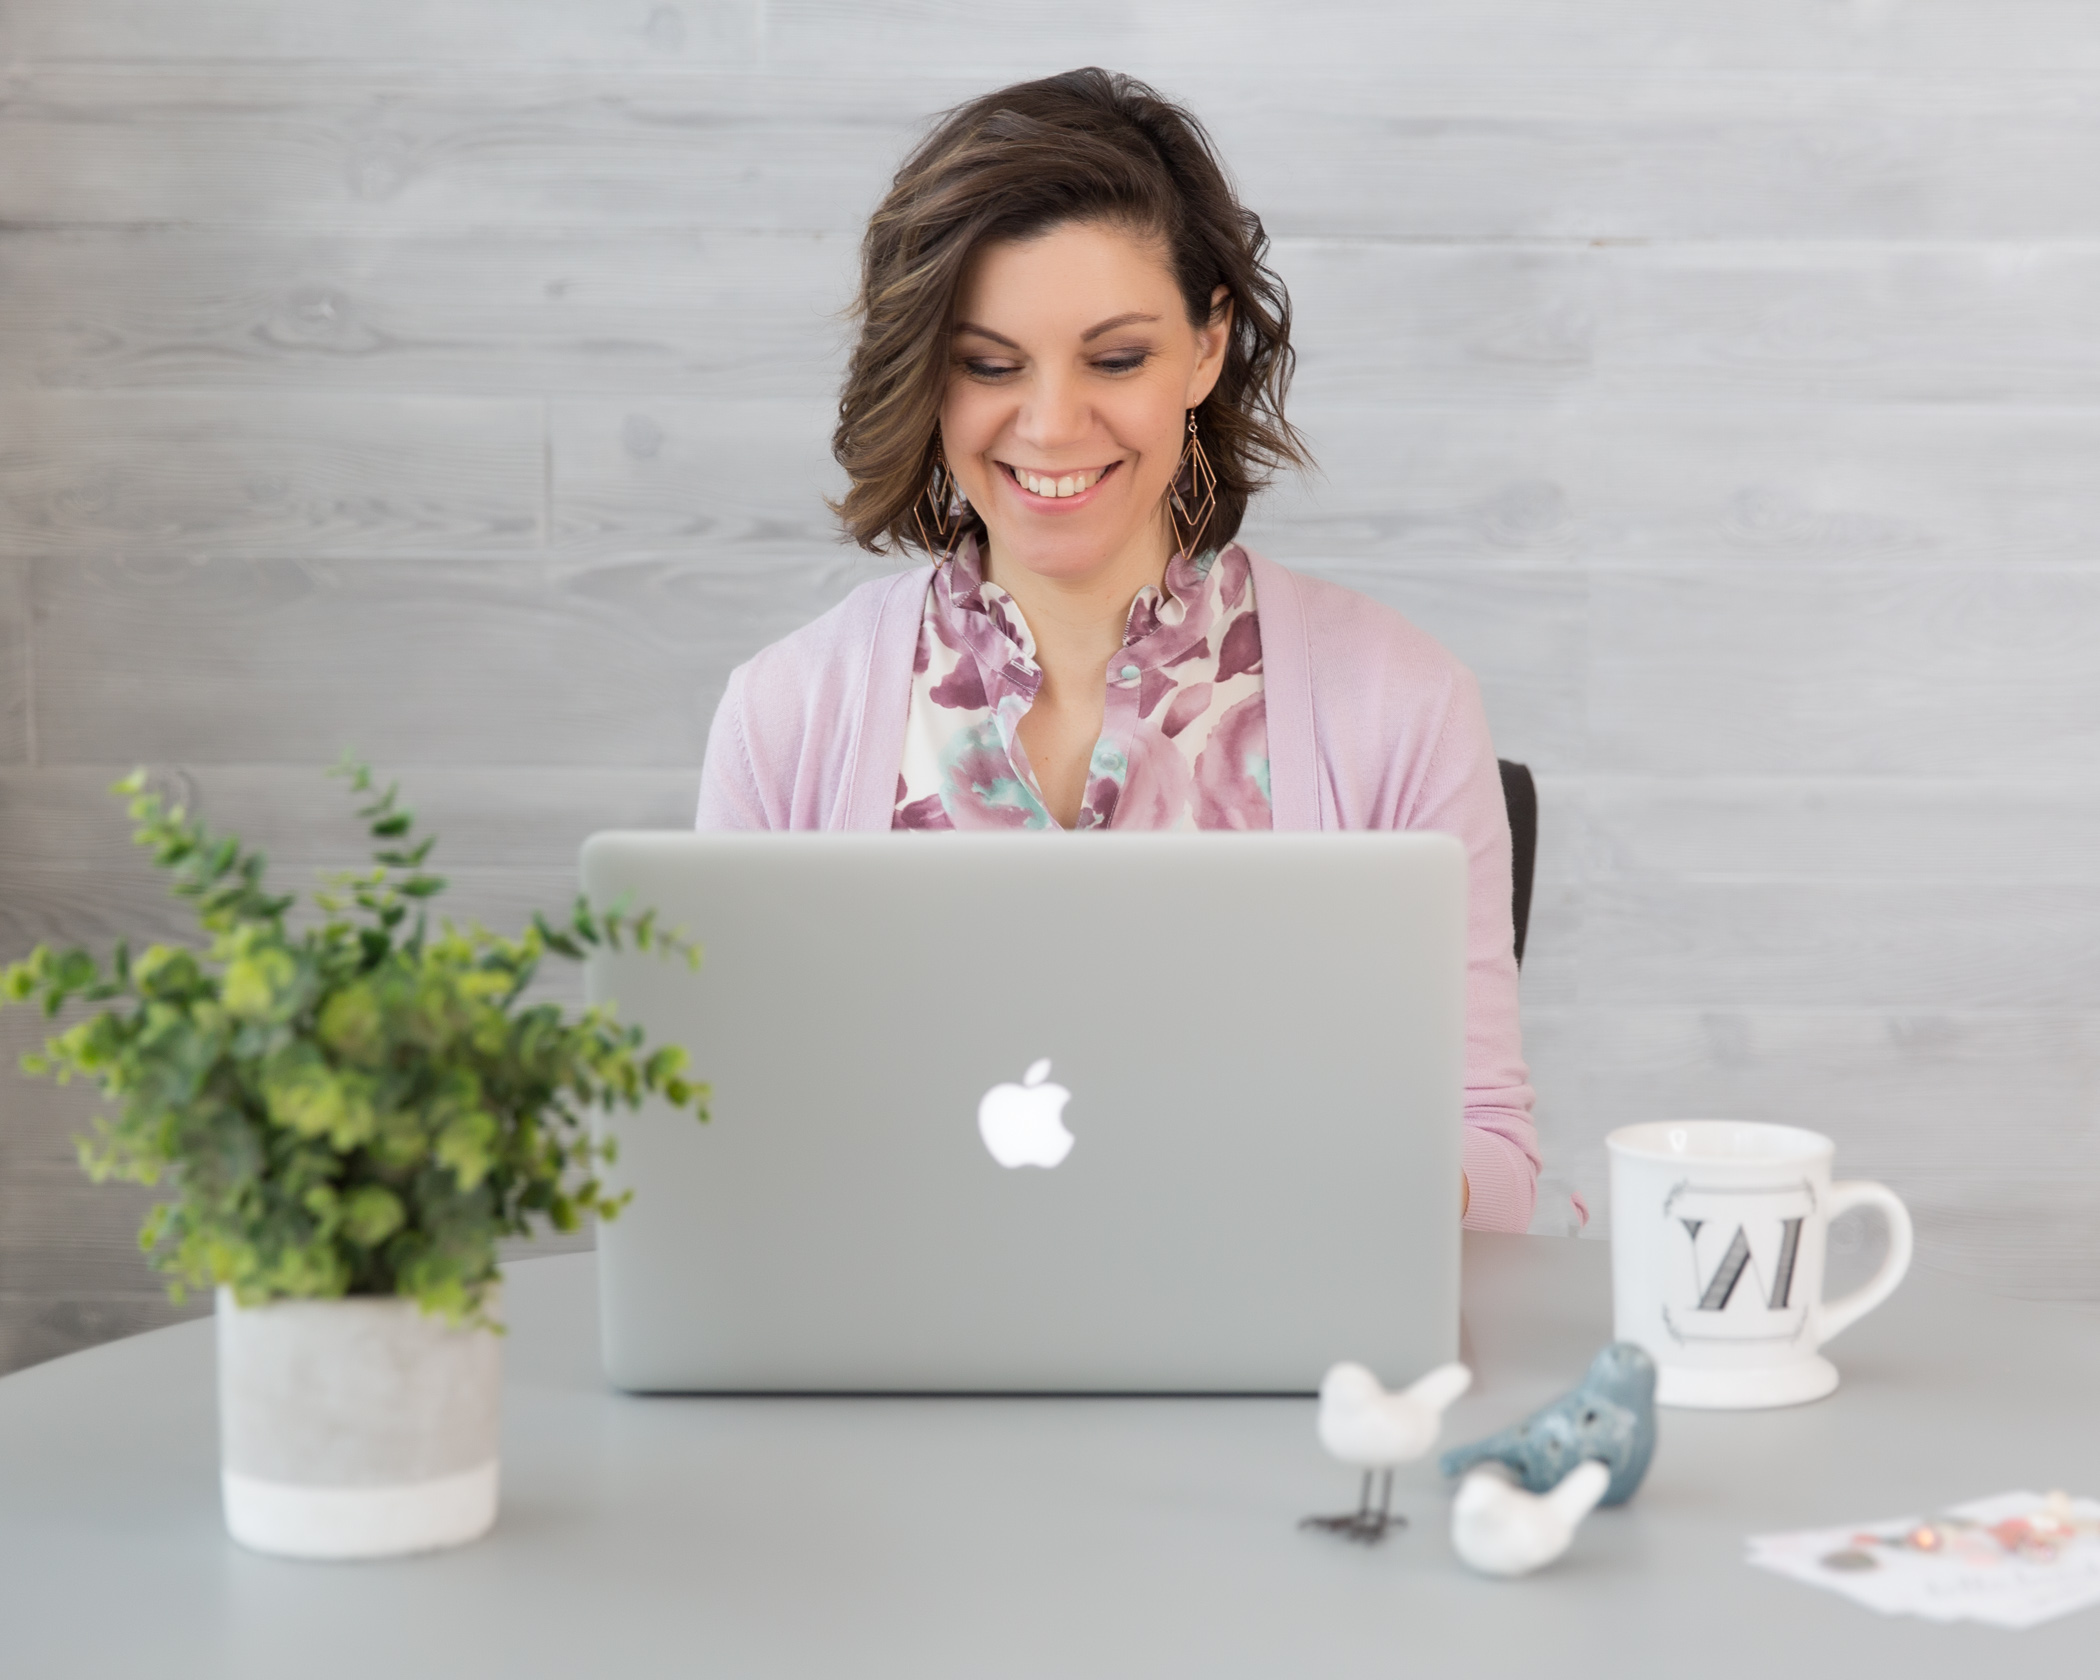 Woman entrepreneur working in a beautiful cardigan and blouse in her branding shoot